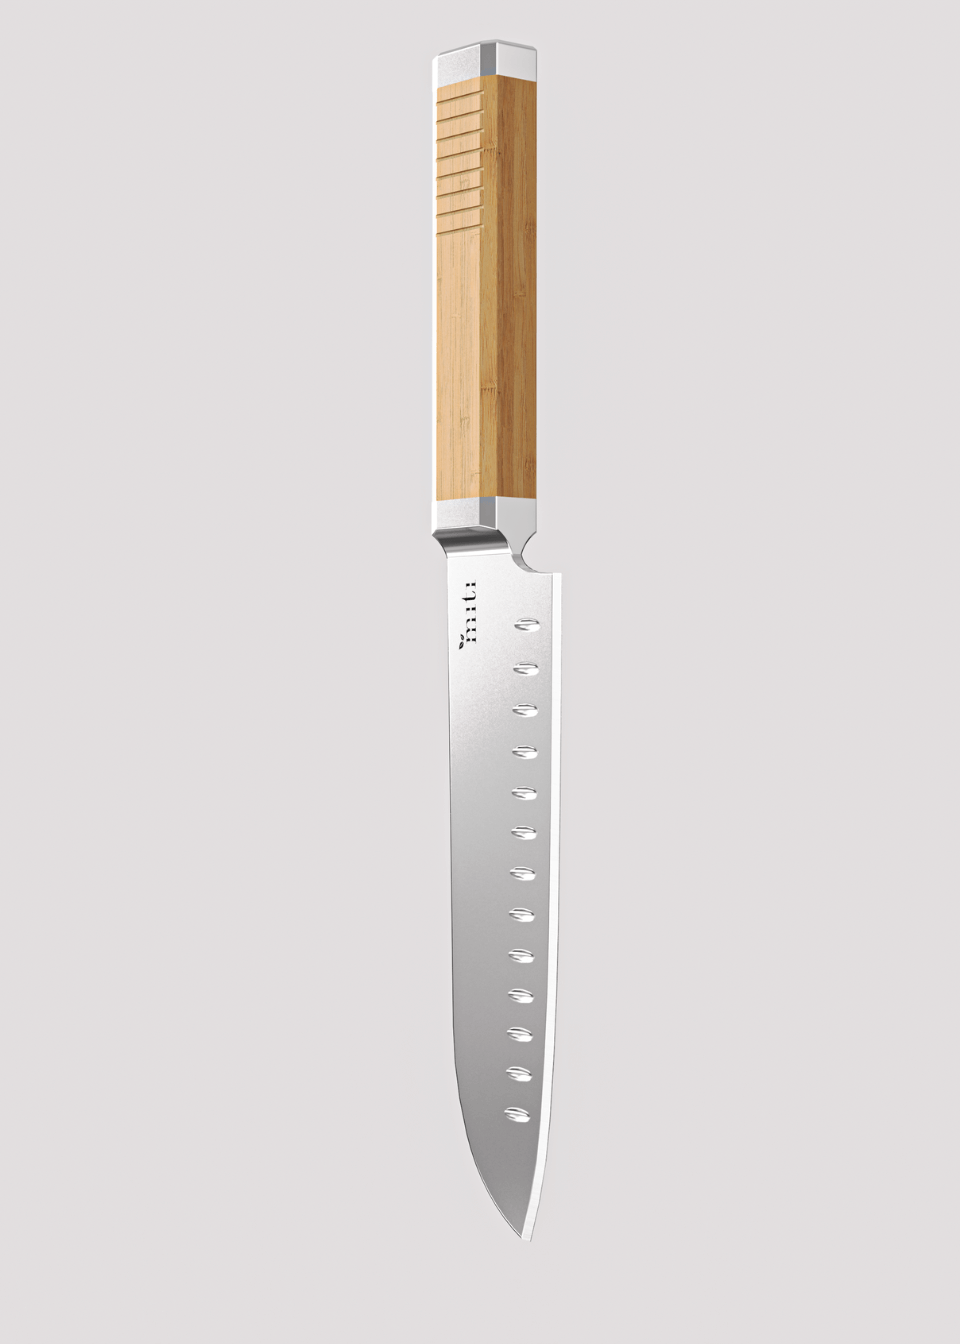 Natural bamboo handle knife pictured upside down in white background